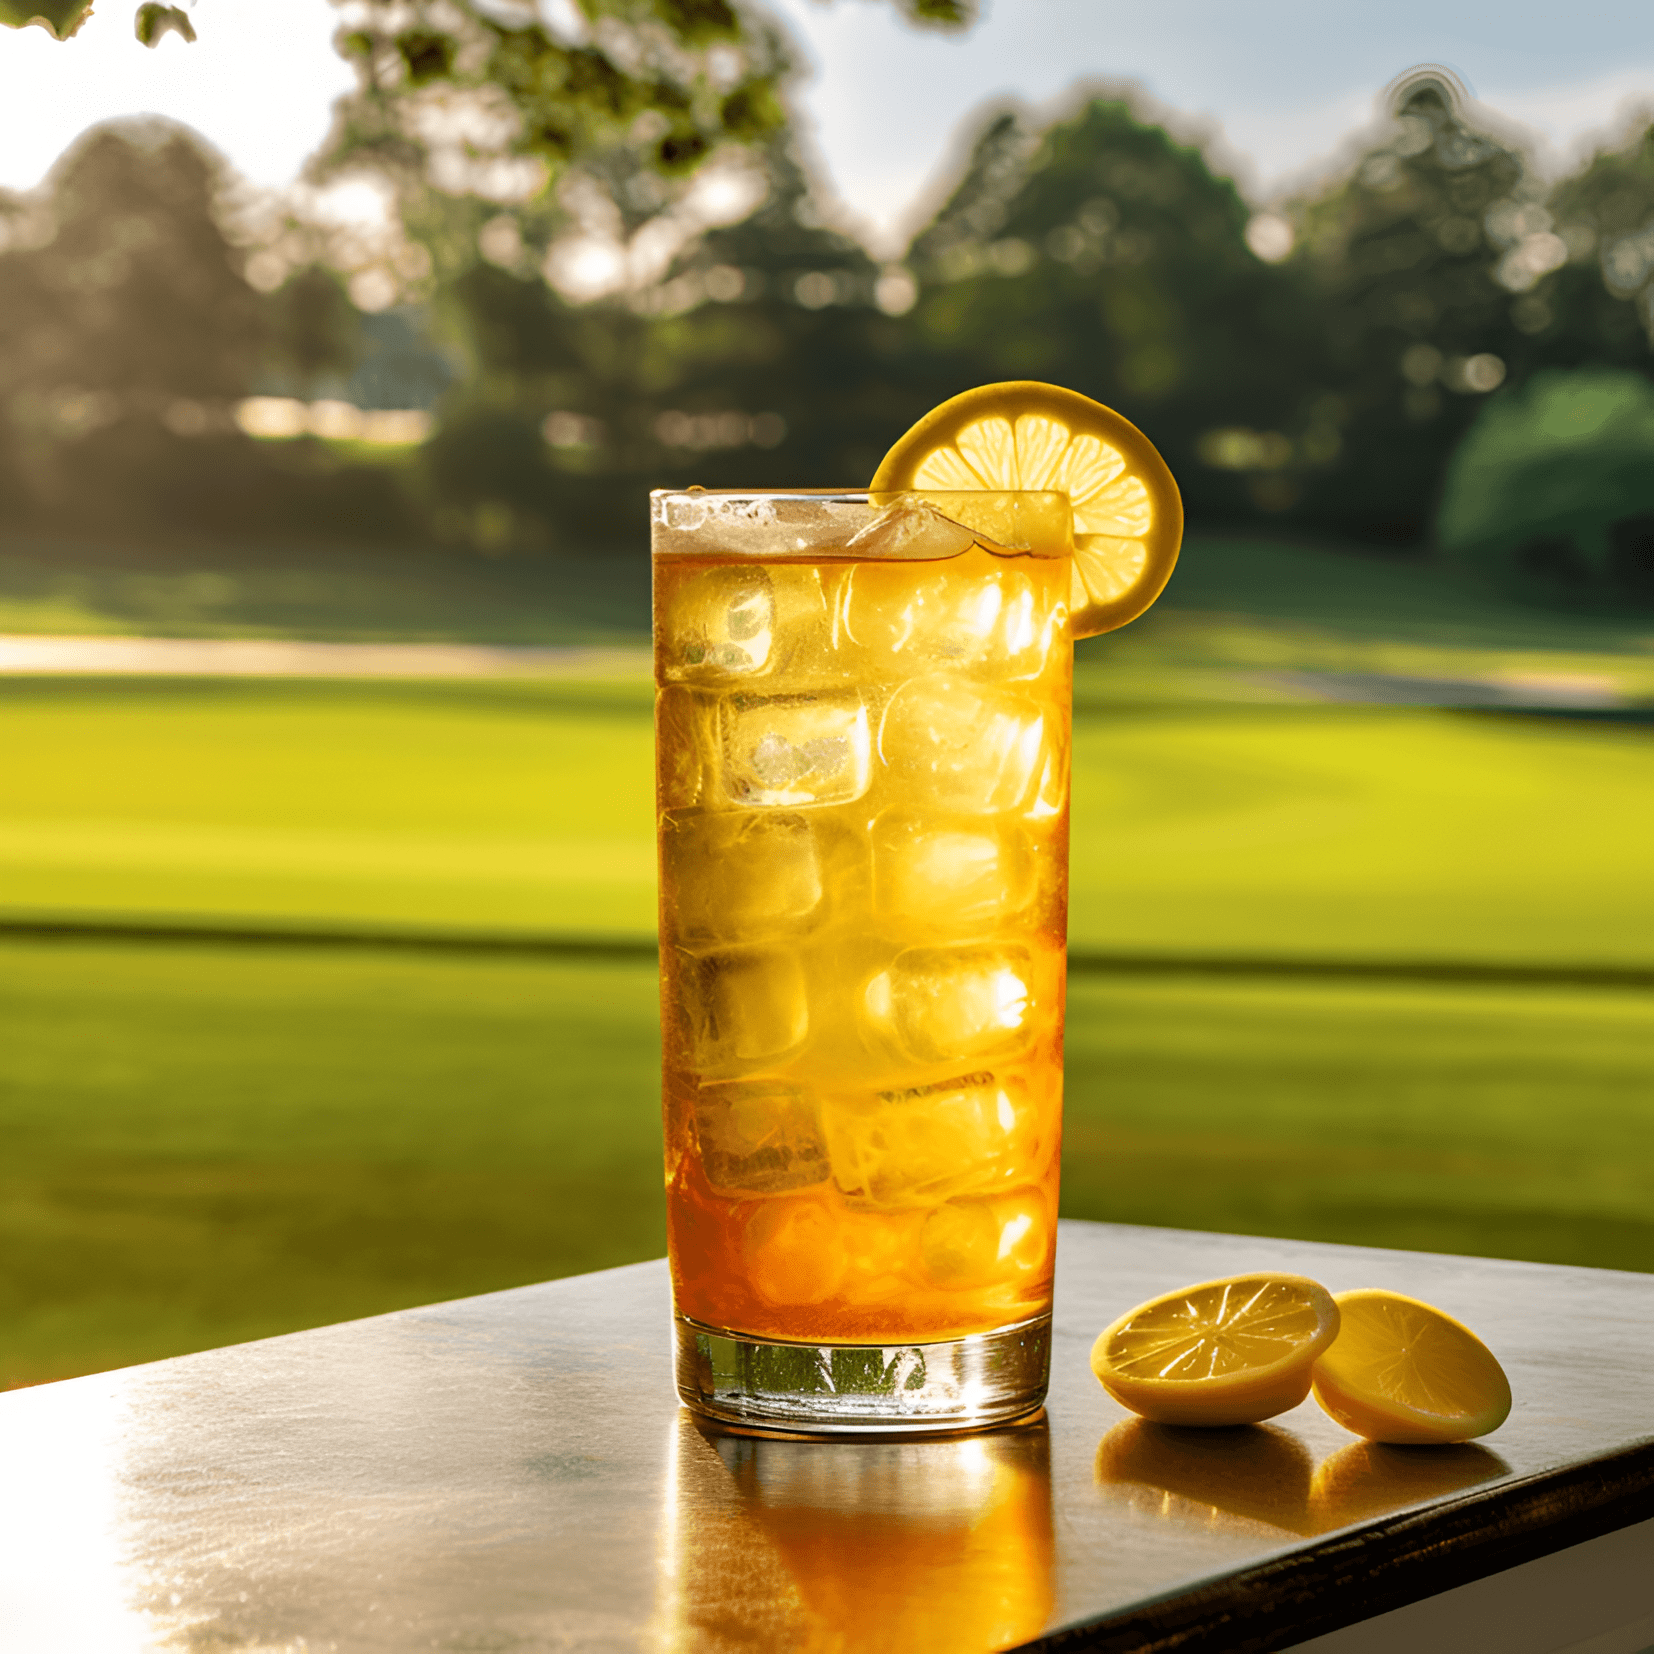 Spiked Arnold Palmer Cocktail Recipe - The Spiked Arnold Palmer has a balanced taste, combining the sweet and tangy flavors of lemonade with the earthy, slightly bitter notes of iced tea. The added alcohol gives it a subtle kick, making it a refreshing and invigorating drink. It's light, crisp, and perfect for sipping on a warm day.